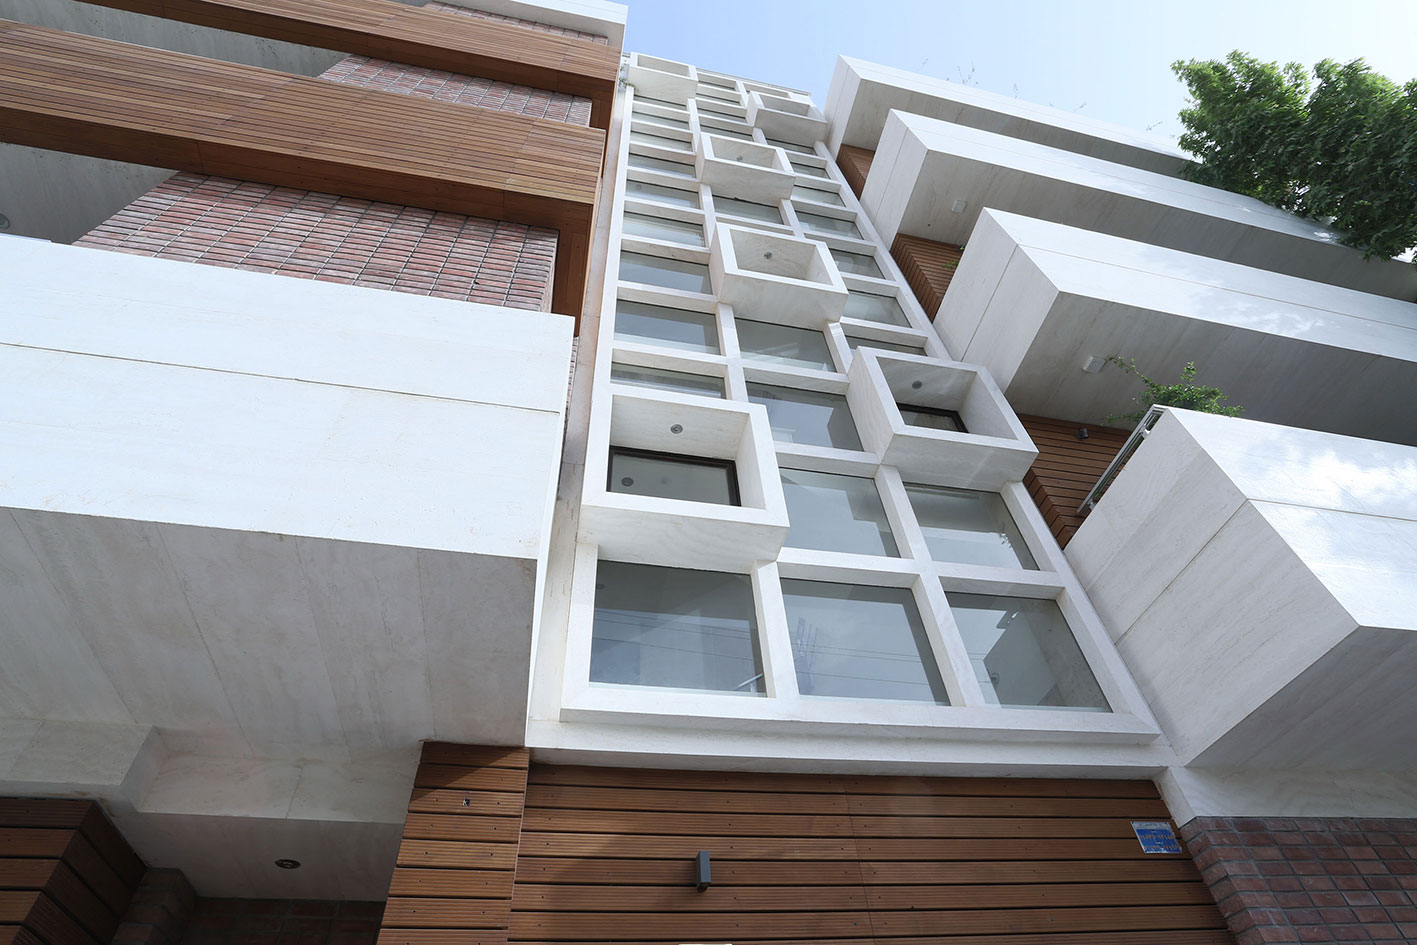 picture no. 1 ofApartment No. 02 project, designed by Ahmad Ghodsimanesh & Partners